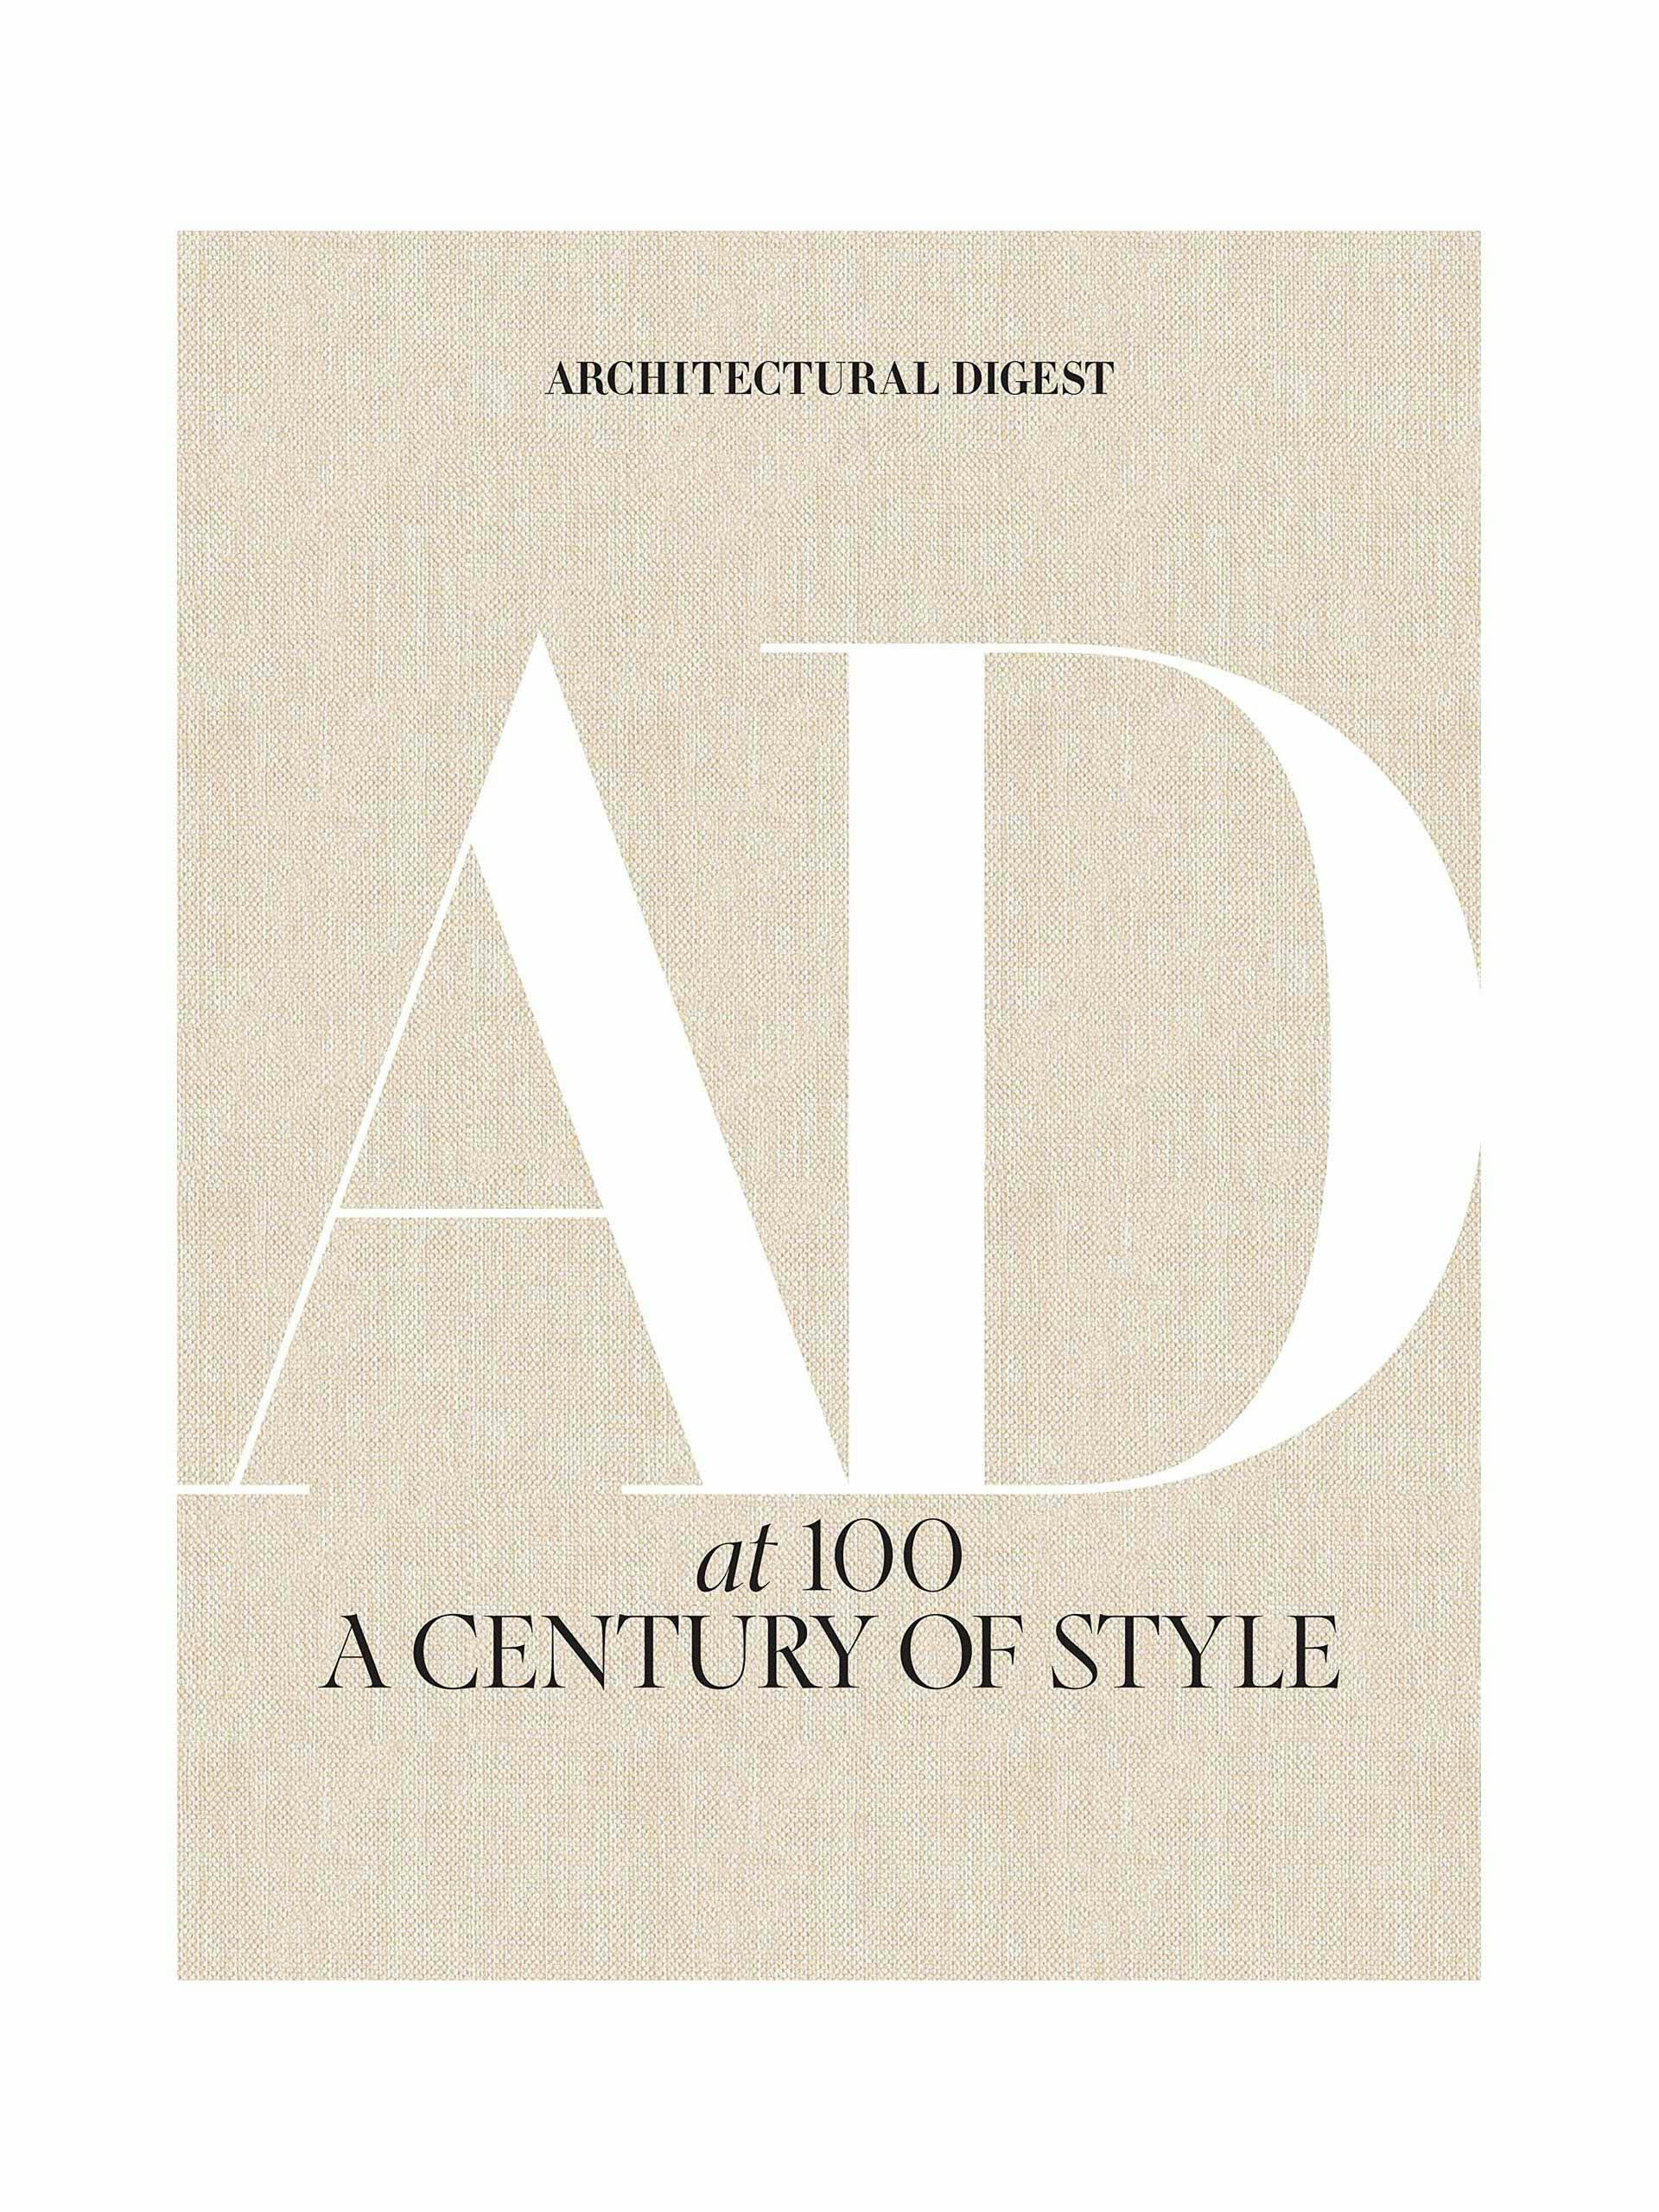 Architectural digest at 100